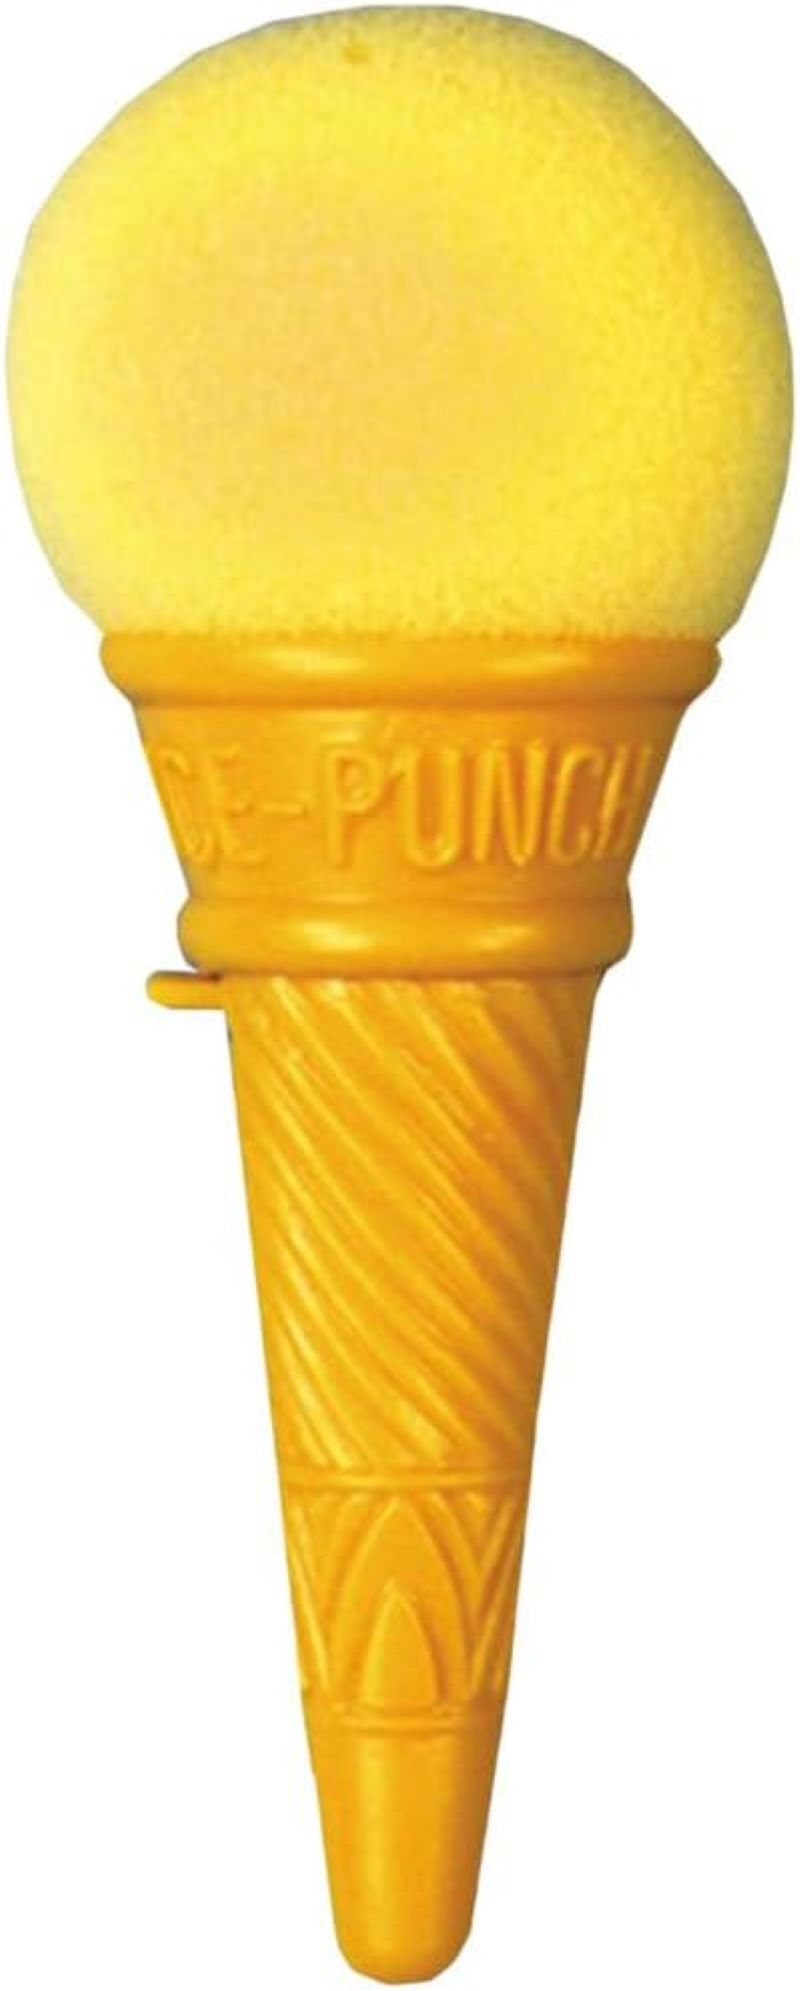 Ice Cream Shooter Toy - Shoot This Foam 7